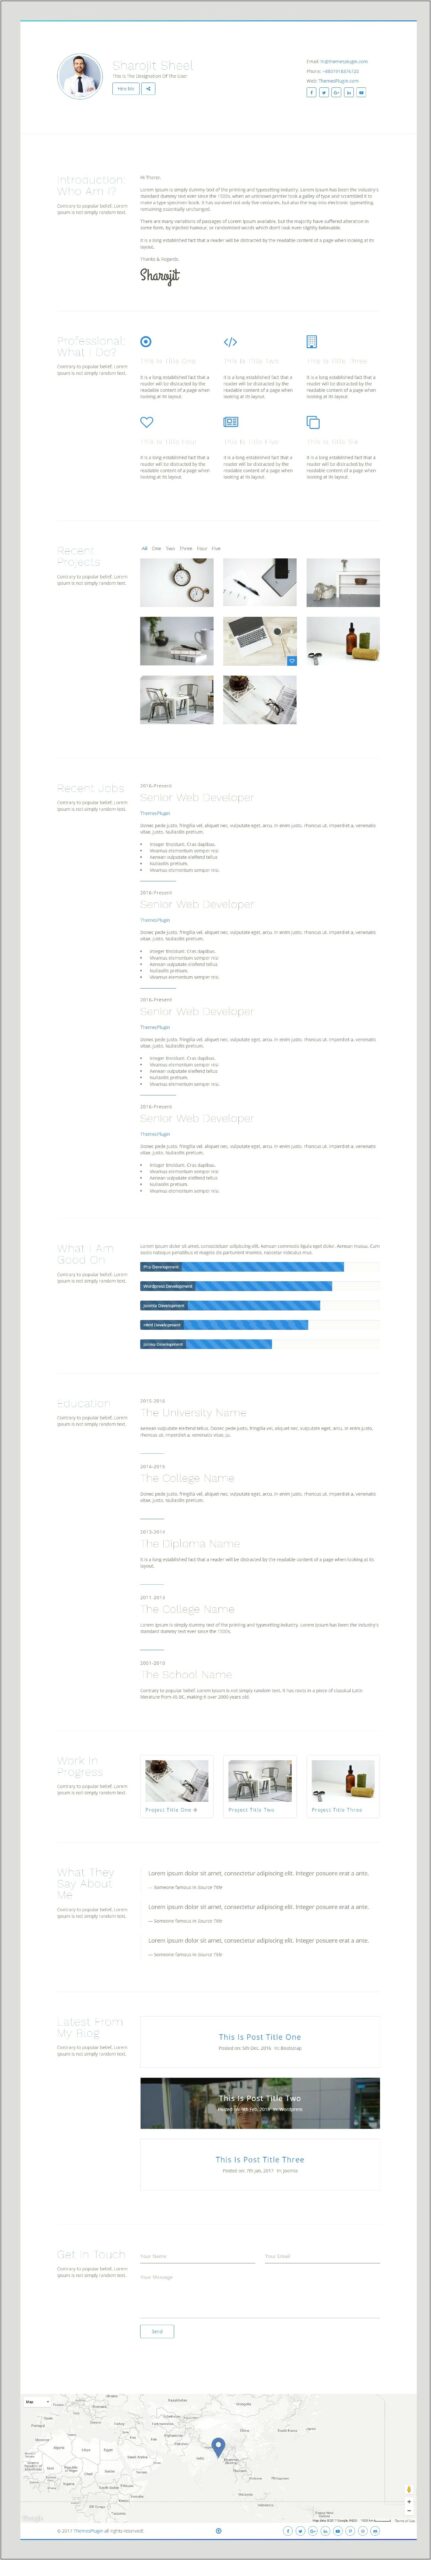 Download Free Resume Html5 Template